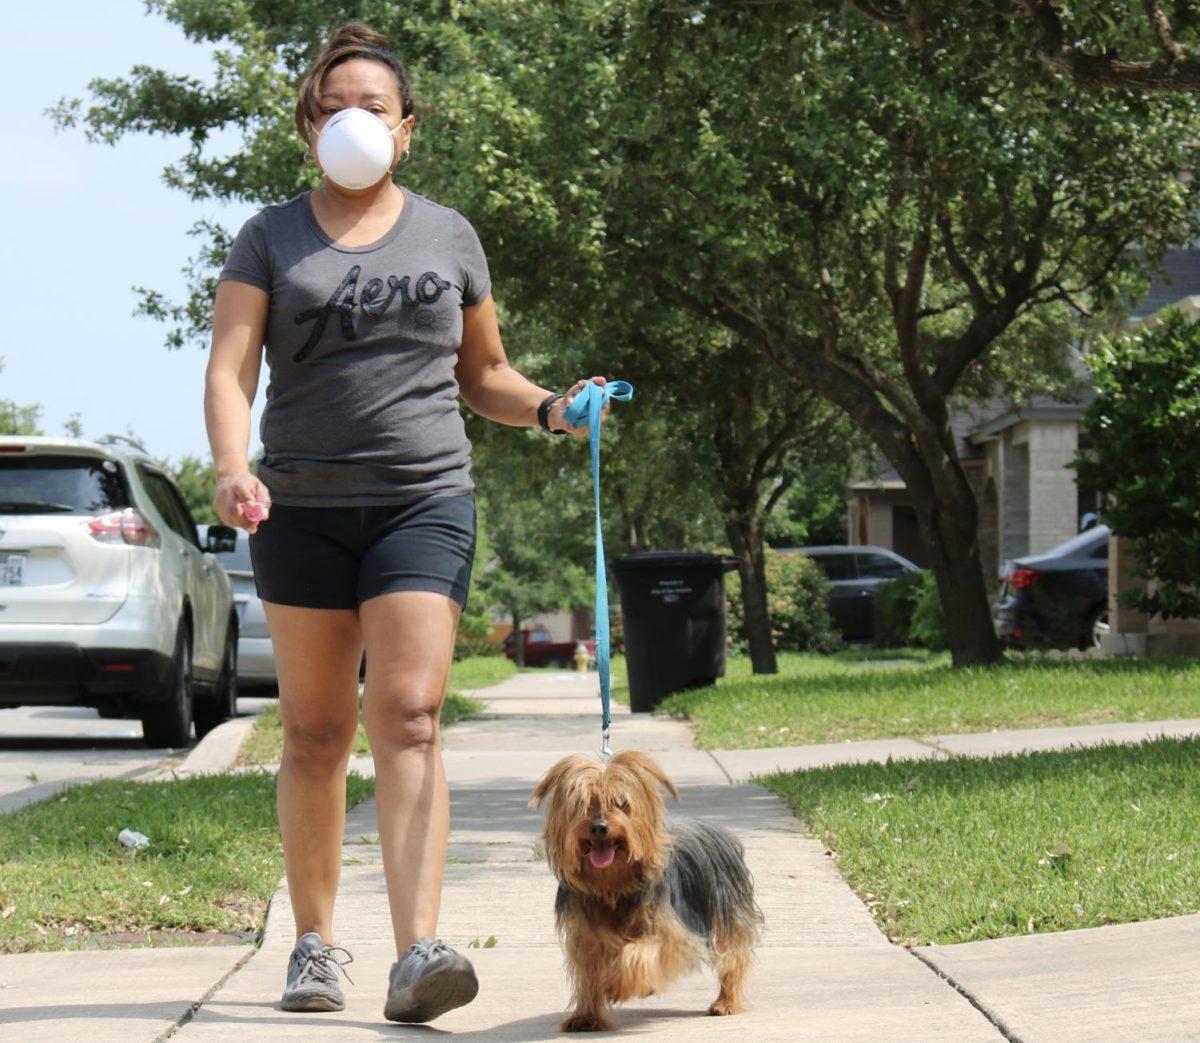 Ruth+Thompson+walks+her+dog+around+the+neighborhood%2C+Tuesday%2C+April+21%2C+2020%2C+in+San+Antonio%2C+Texas.+San+Antonio+has+mandated+citizens+to+wear+either+face+coverings+or+masks+while+in+public.